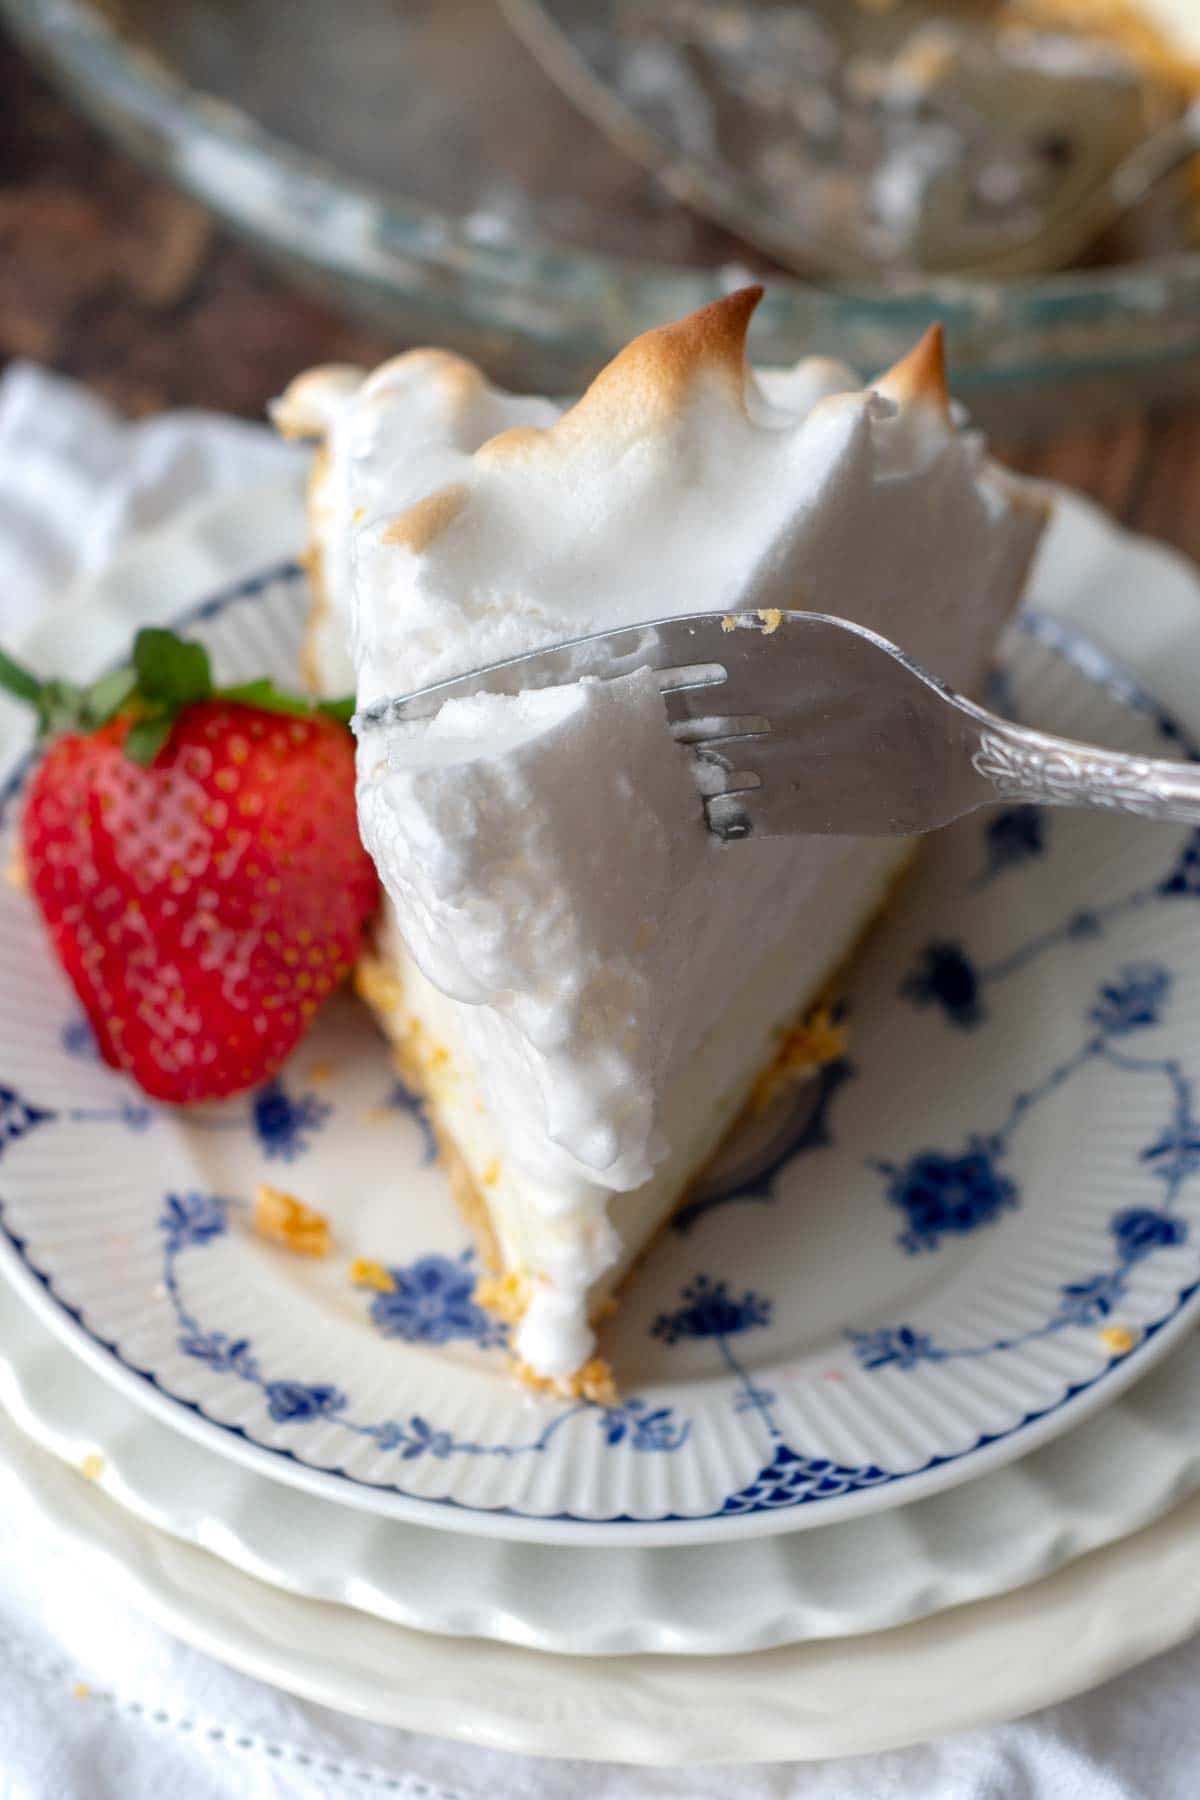 a fork slicing into the meringue on top of the frozen lemon pie